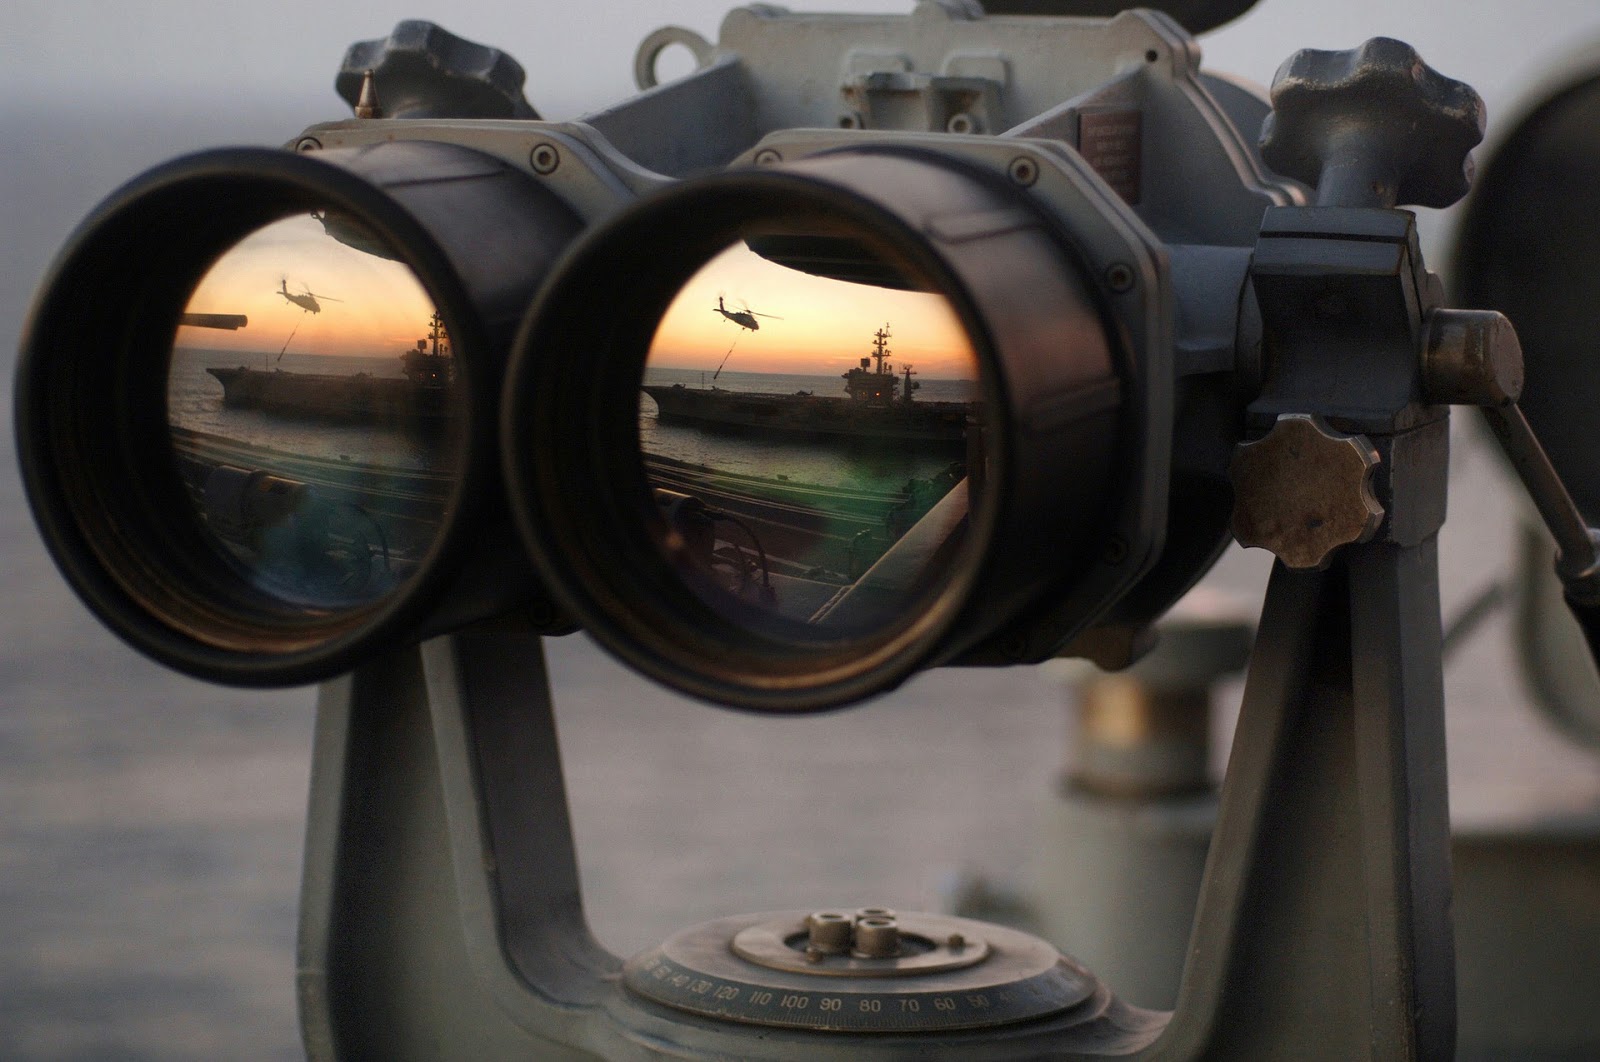 Binoculars spying on a military ship and helicopter